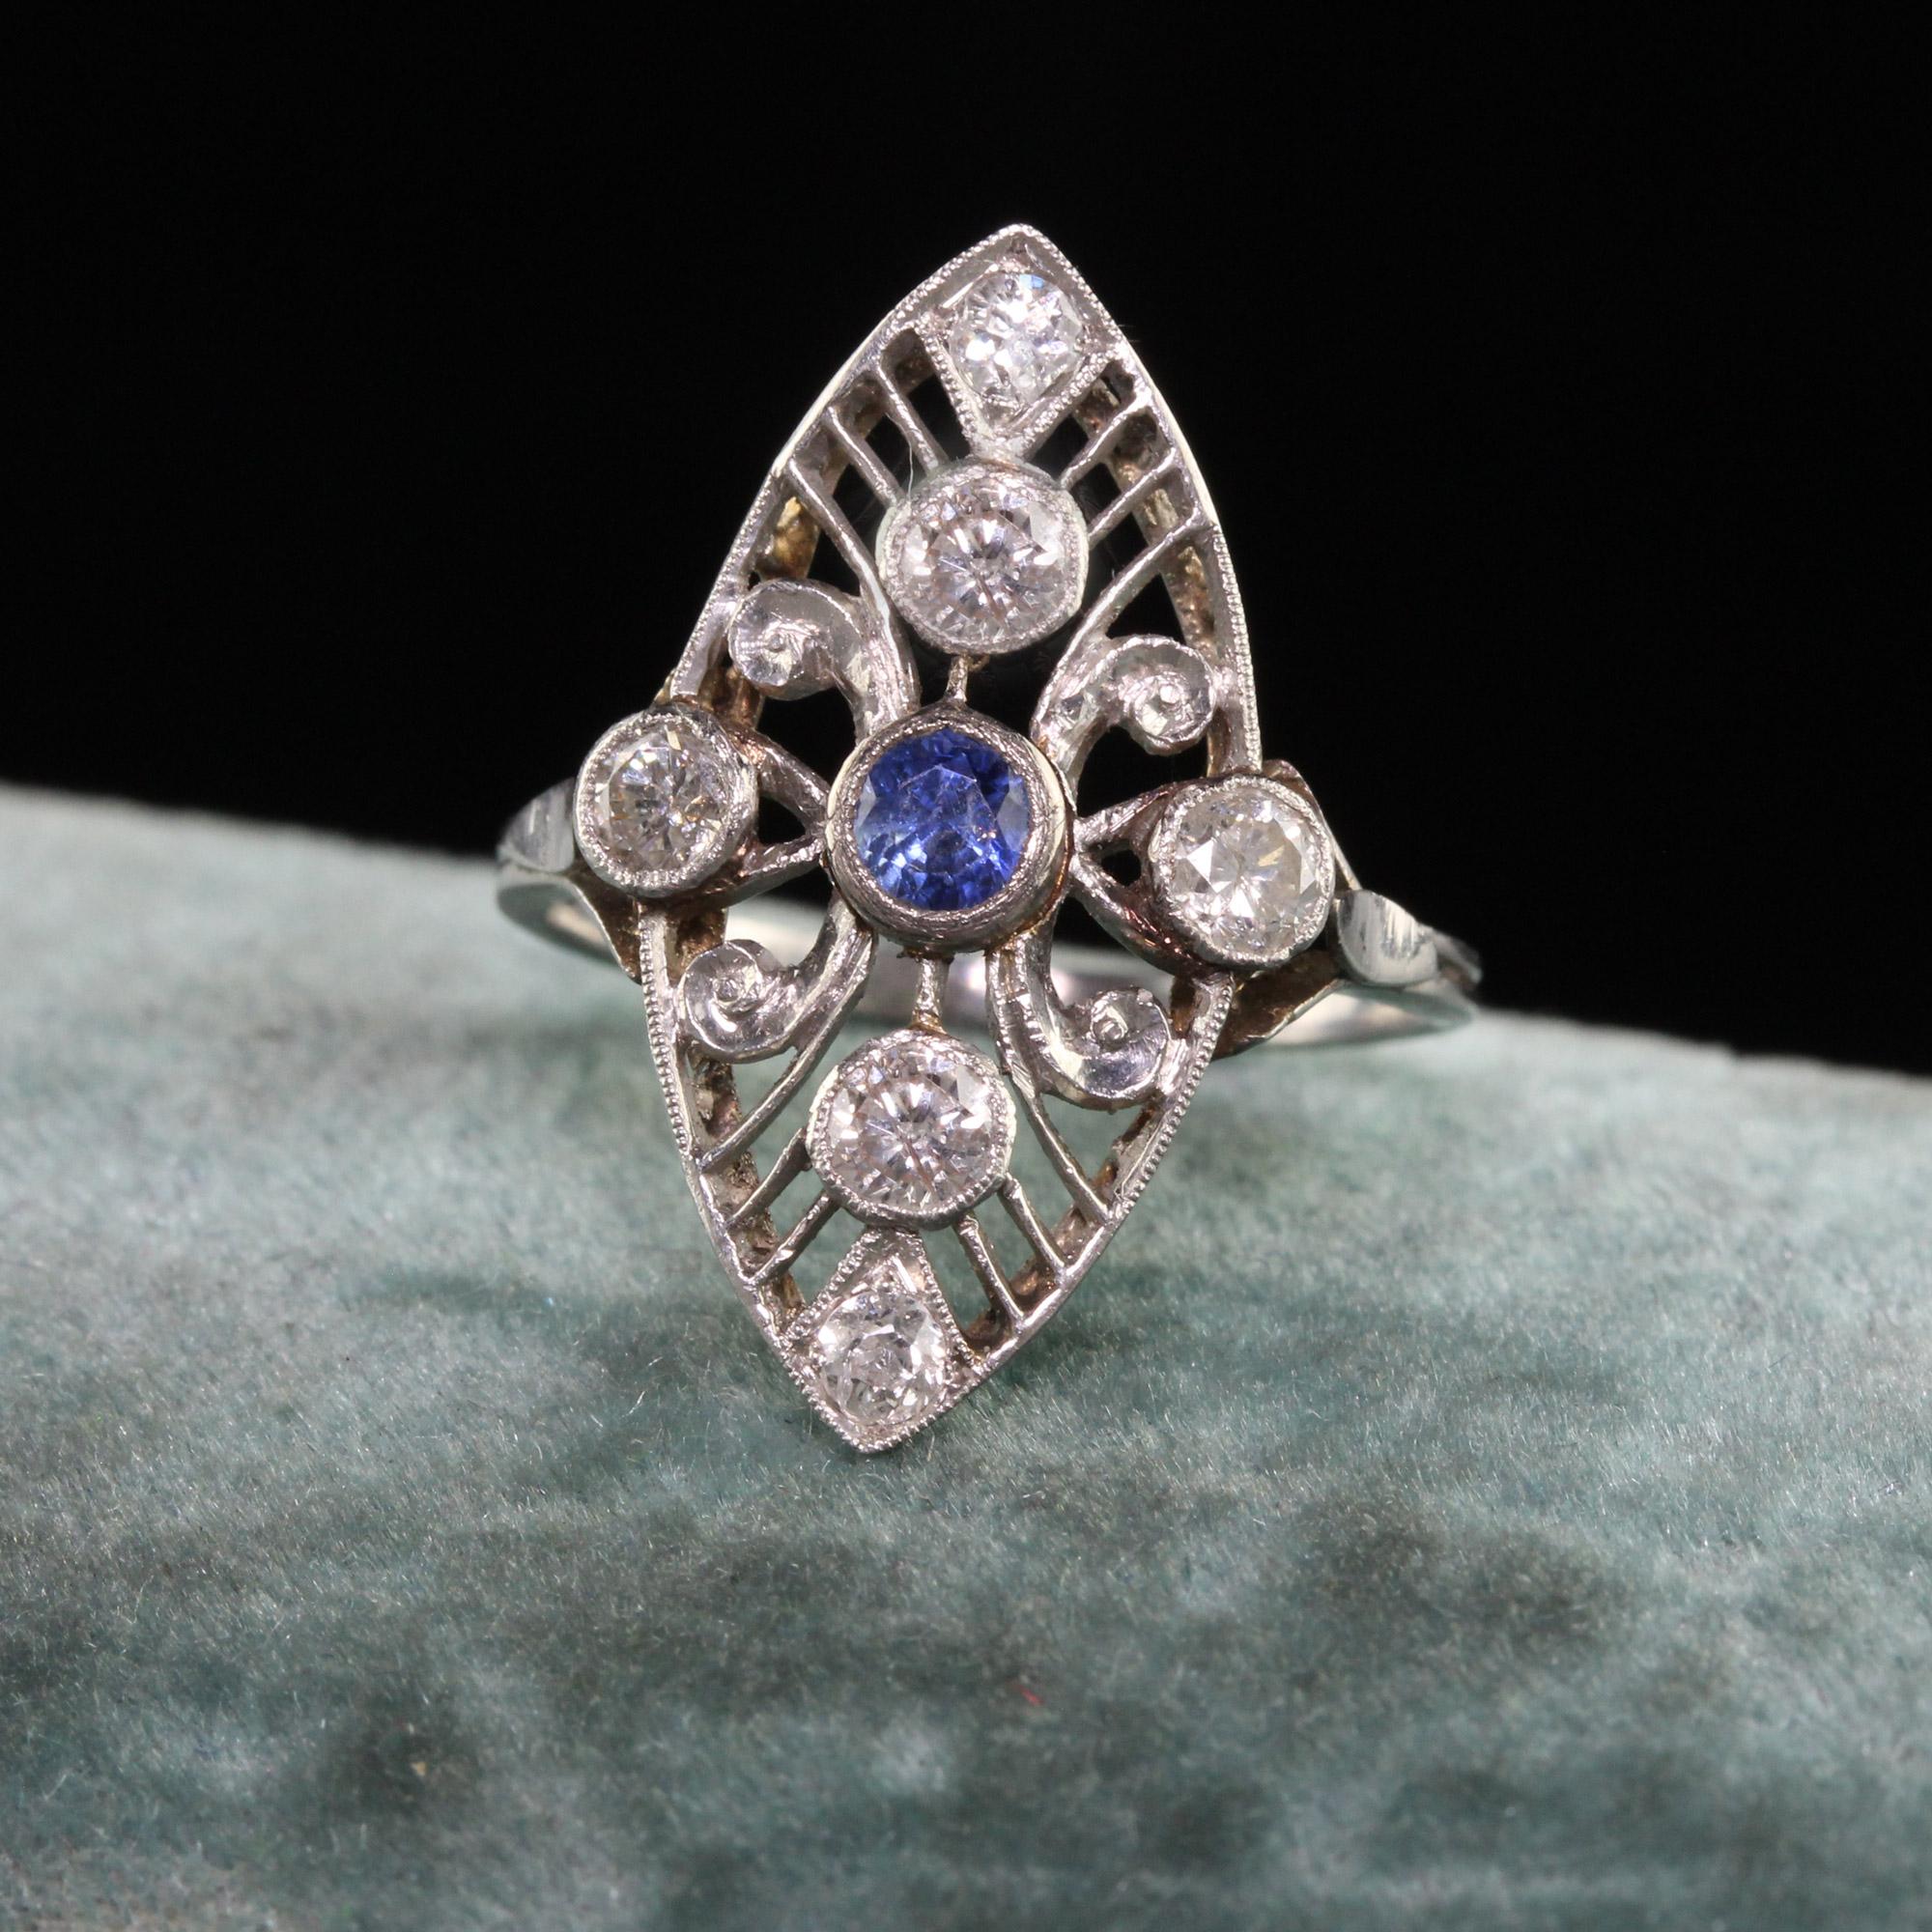 Beautiful Antique Art Deco Platinum Old Euro Diamond Sapphire Navette Ring. This beautiful ring is crafted in platinum. The ring features old european cut diamonds and a natural sapphire in the center of a filigree mounting.

Item #R1360

Metal: